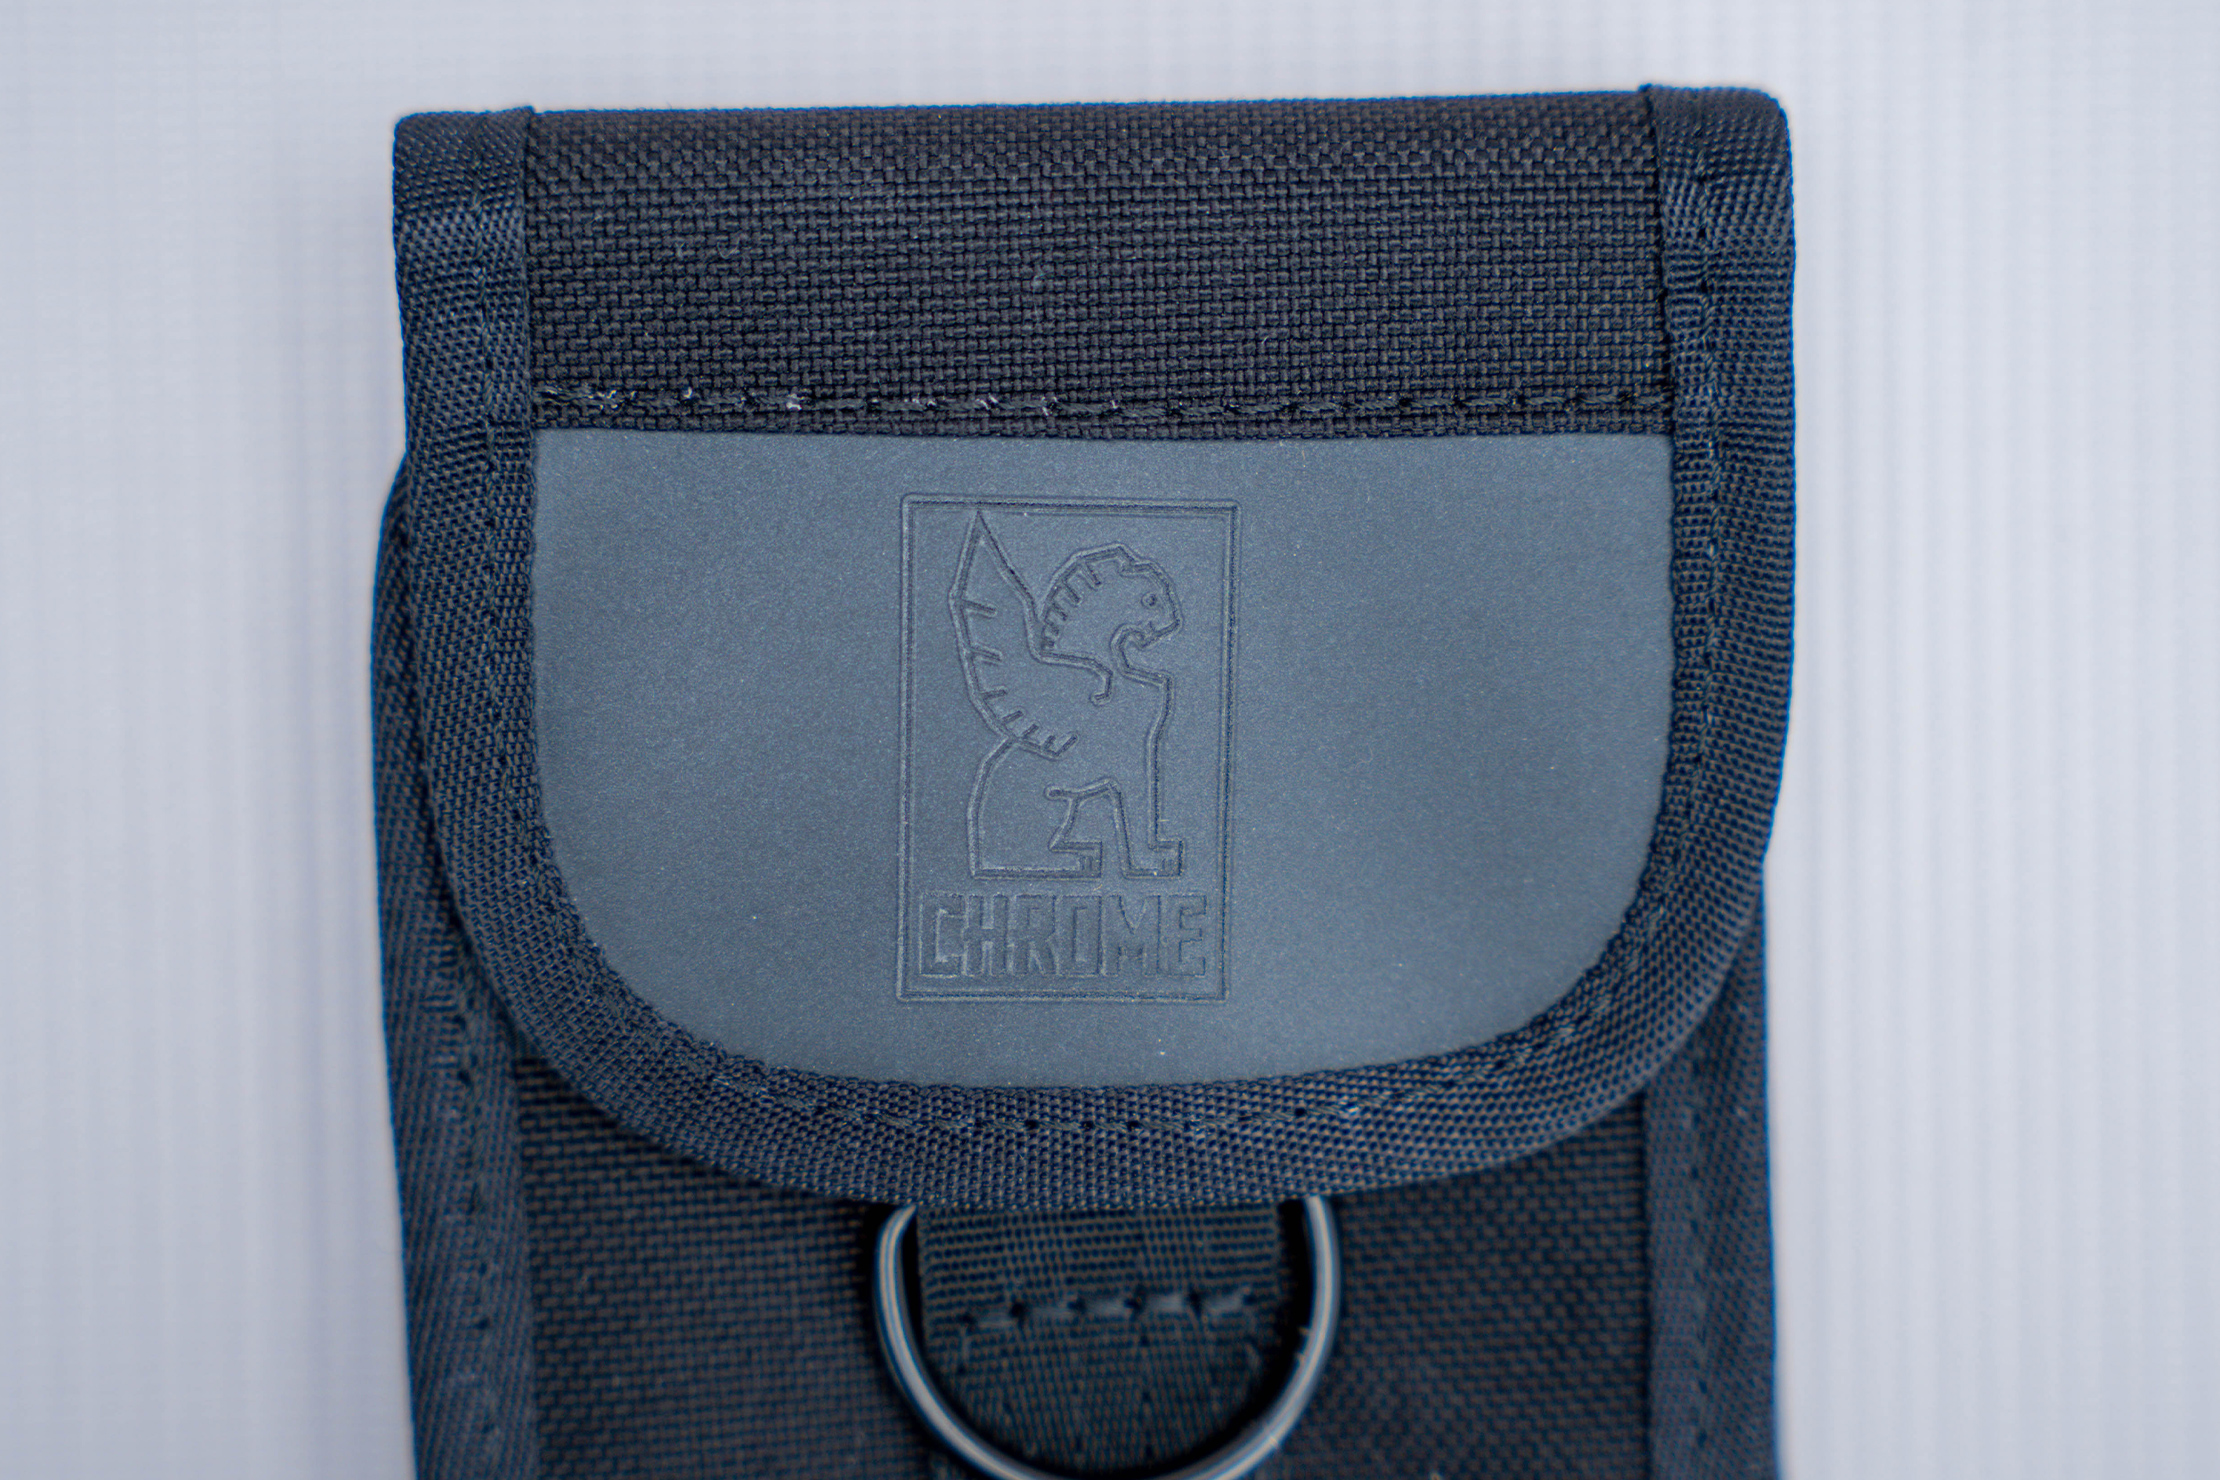 Chrome Industries Phone Pouch Brand